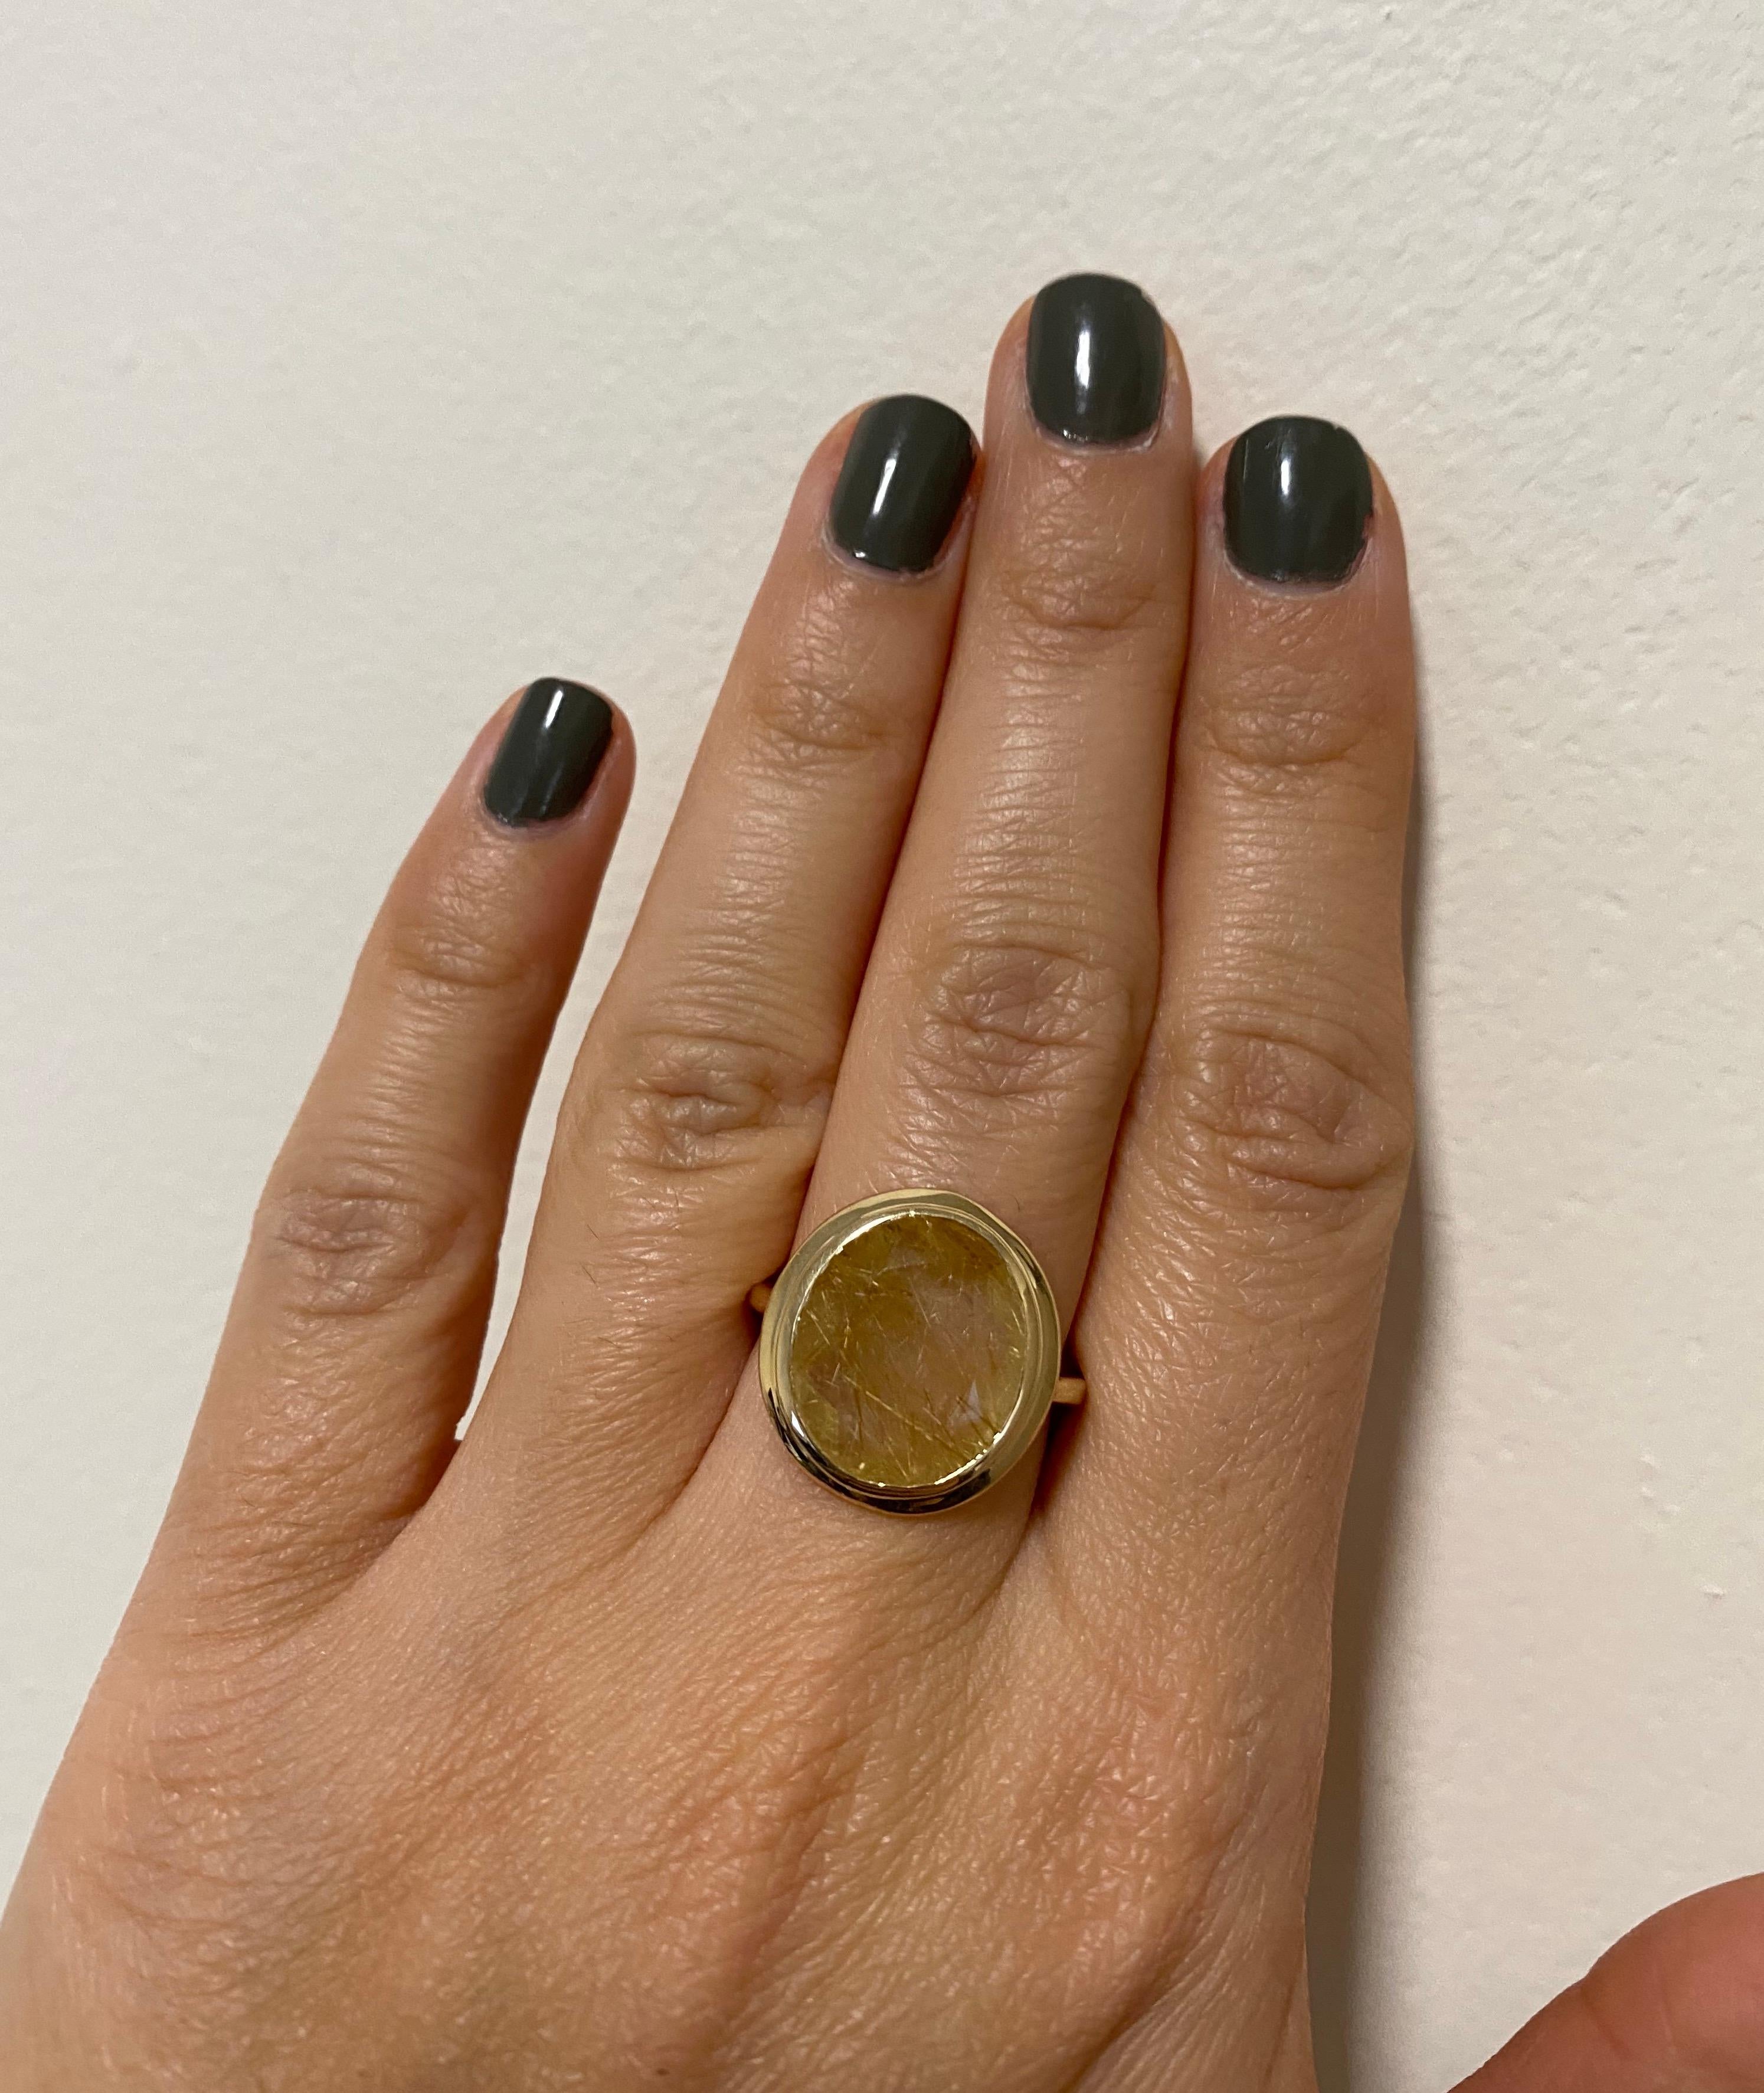 Material: 14k Yellow Gold 
Stone Details: 1 Oval Rutilated Quartz at 5.32 Carats - Measuring 12 x 14 mm.
This piece measures approximately 20 x 17 mm.
Alberto offers complimentary sizing on all rings.

Fine one-of-a-kind craftsmanship meets